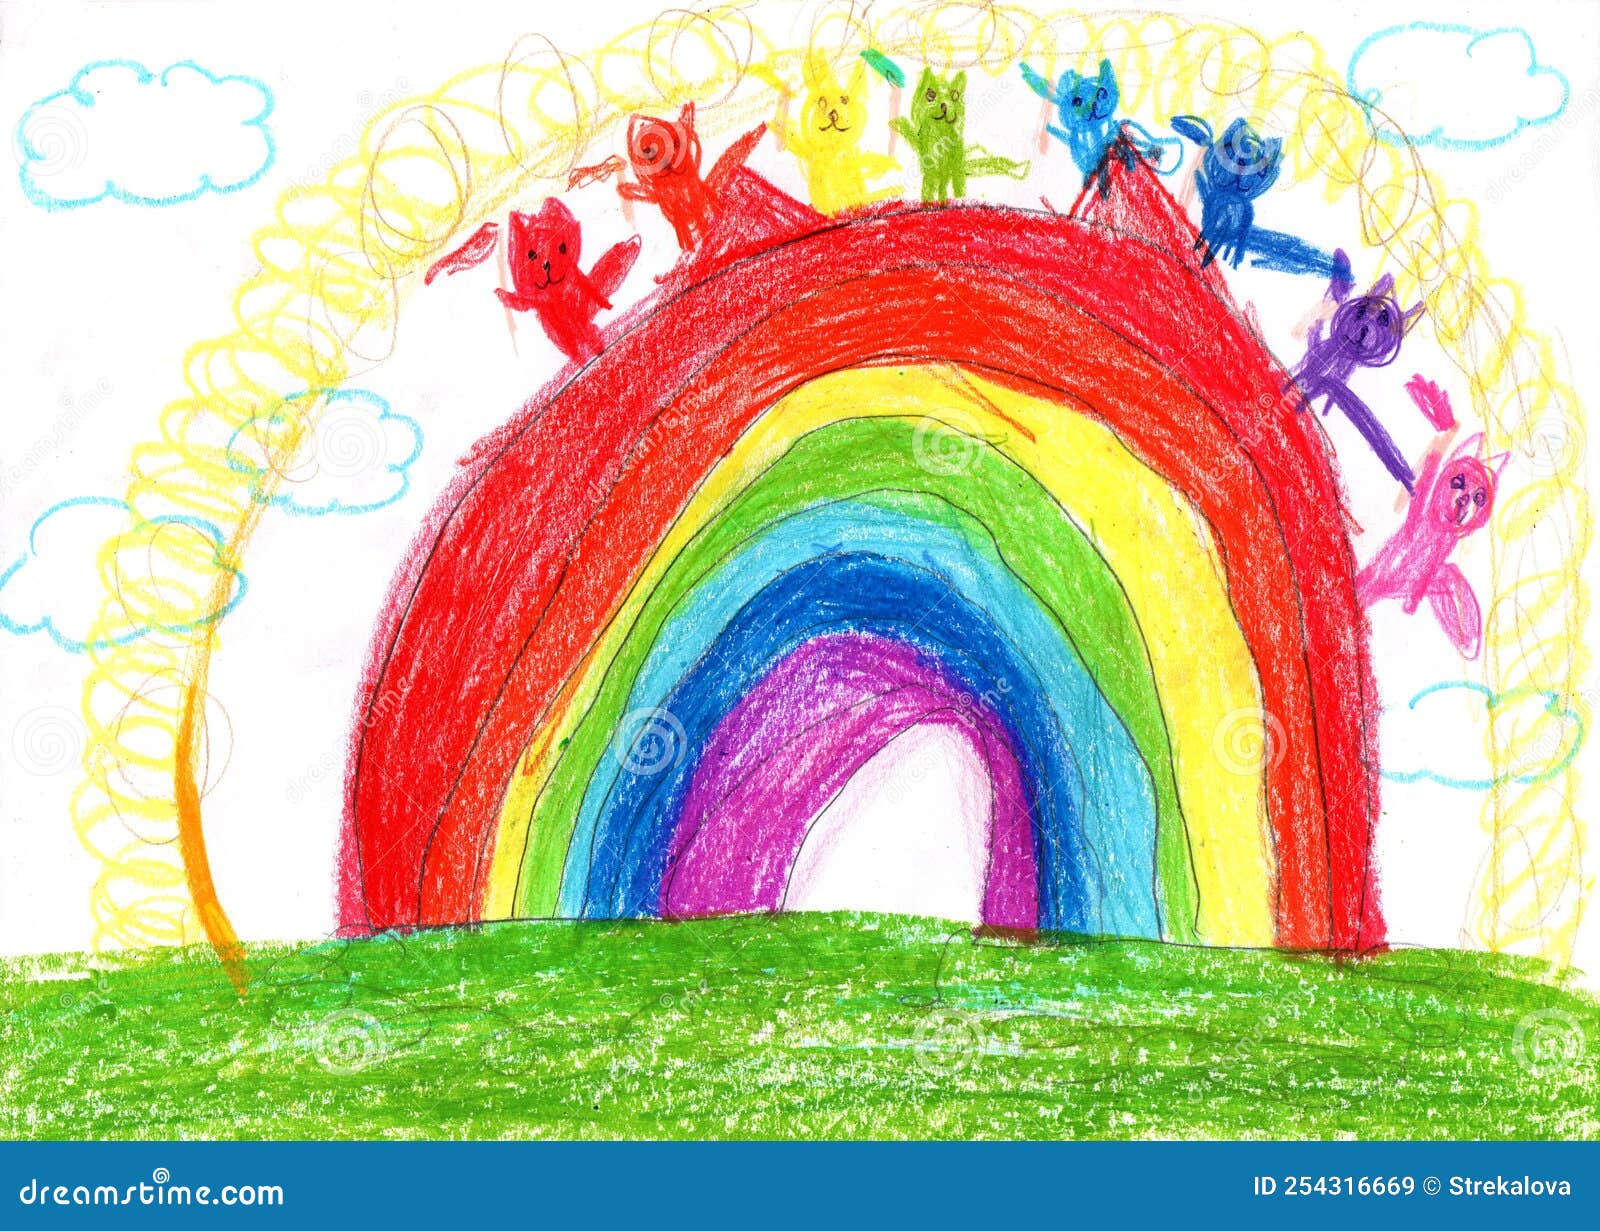 What can we learn from children's drawings?